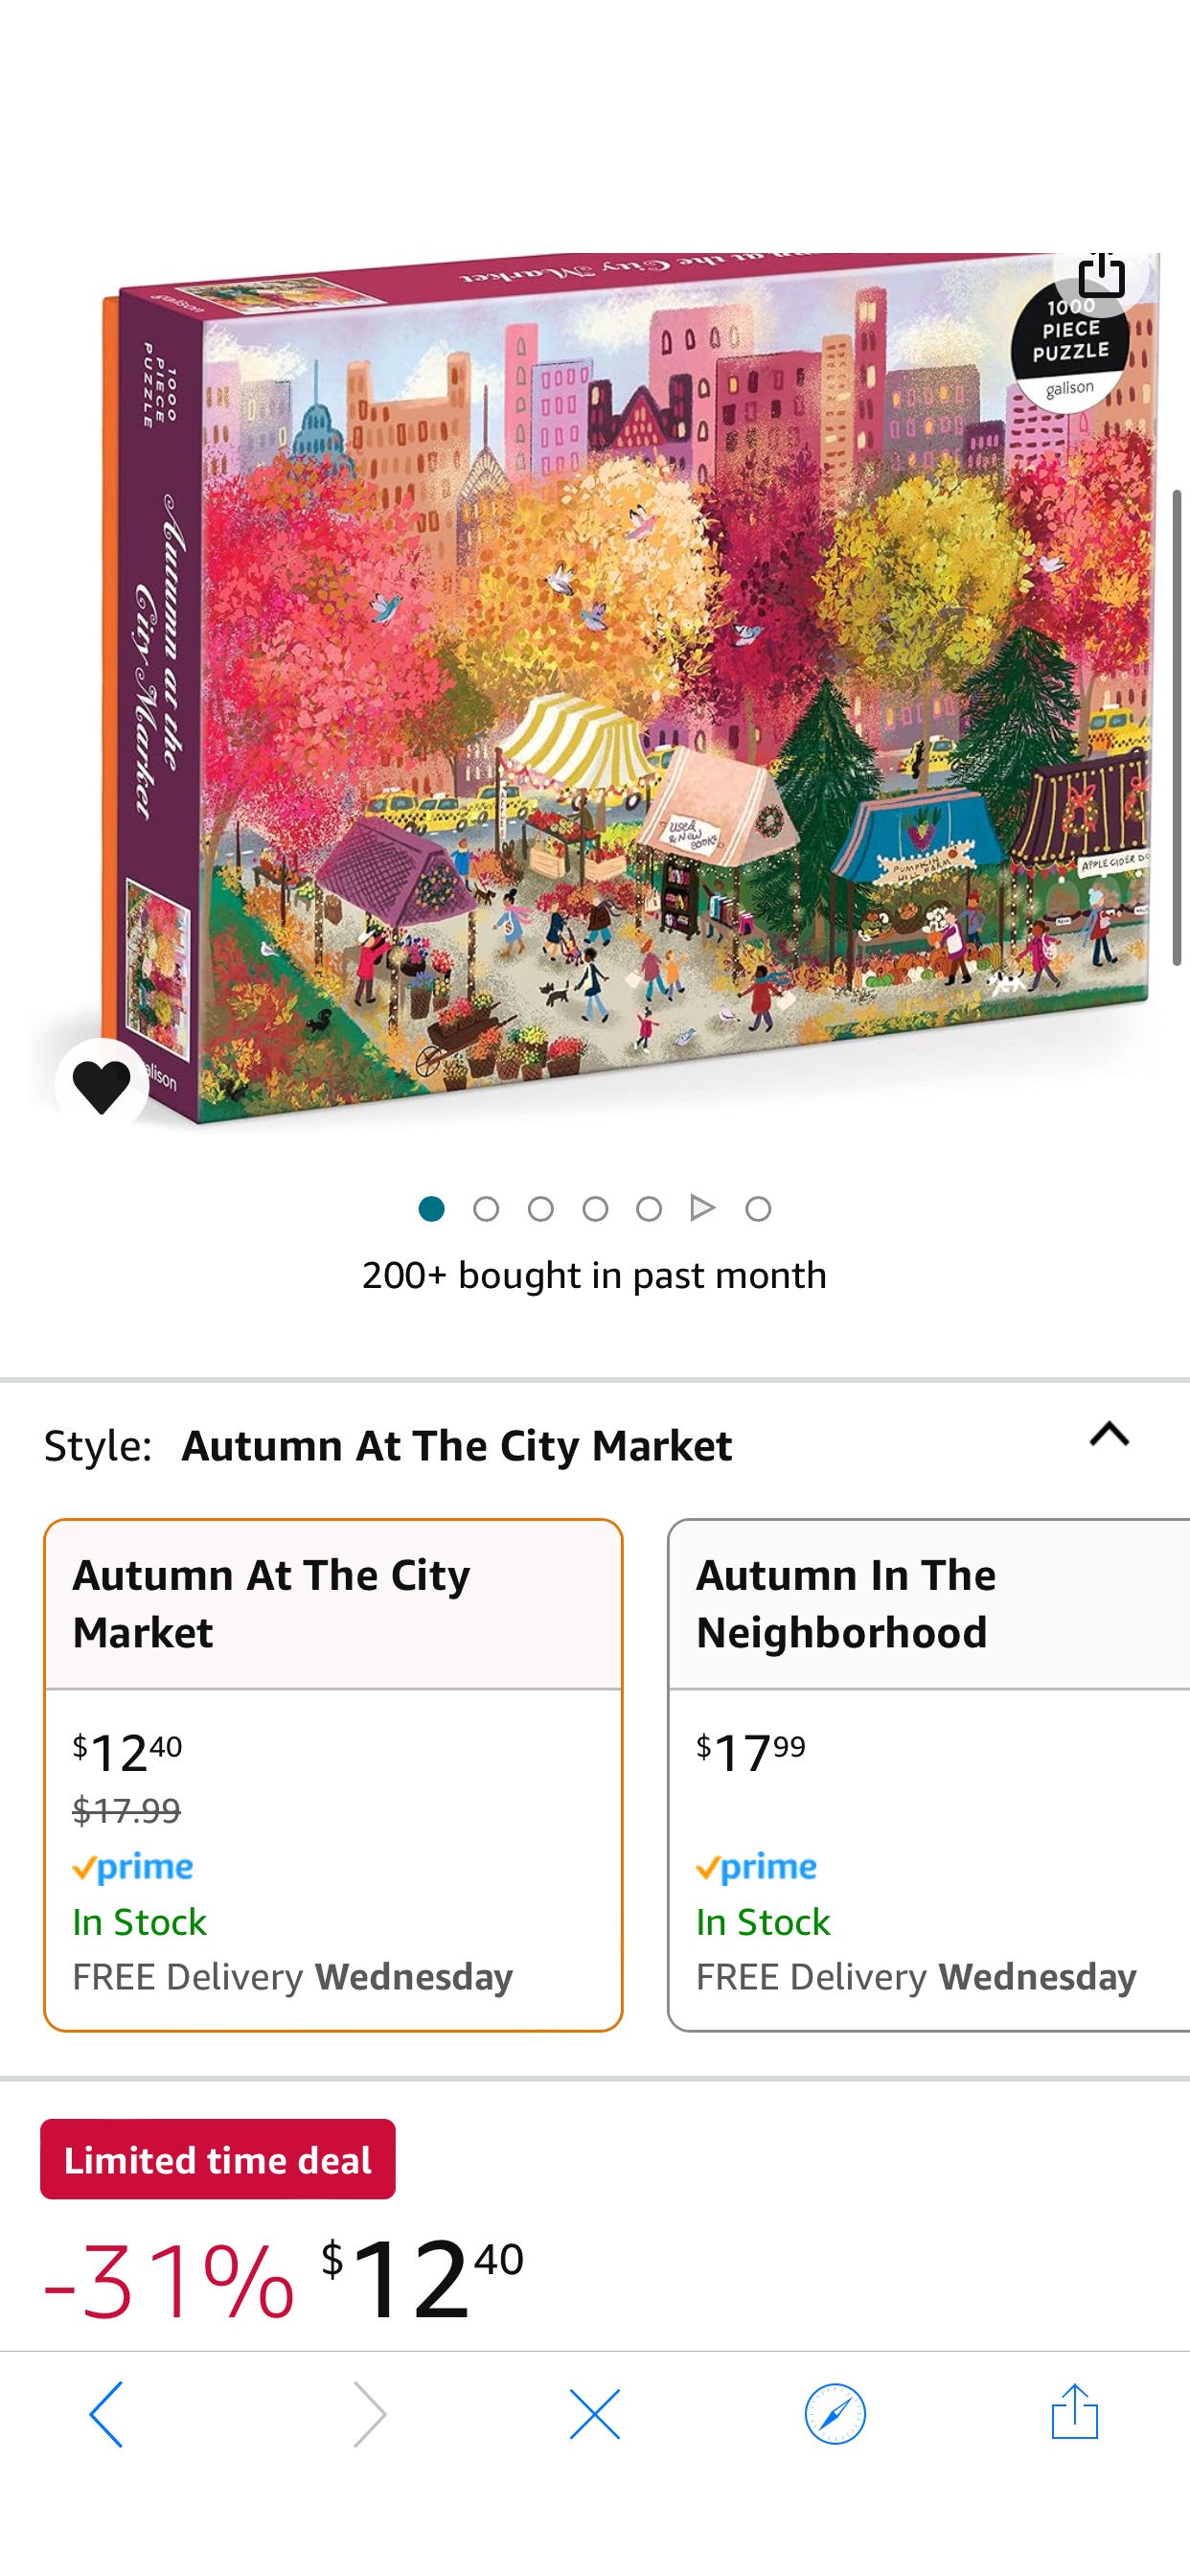 Amazon.com: Galison Autumn at The City Market – 1000 Piece Puzzle Fun and Challenging Activity with Bright and Bold Artwork of A Fall Day at A Farmer’s Market for Adults and Families : Galison, Laform